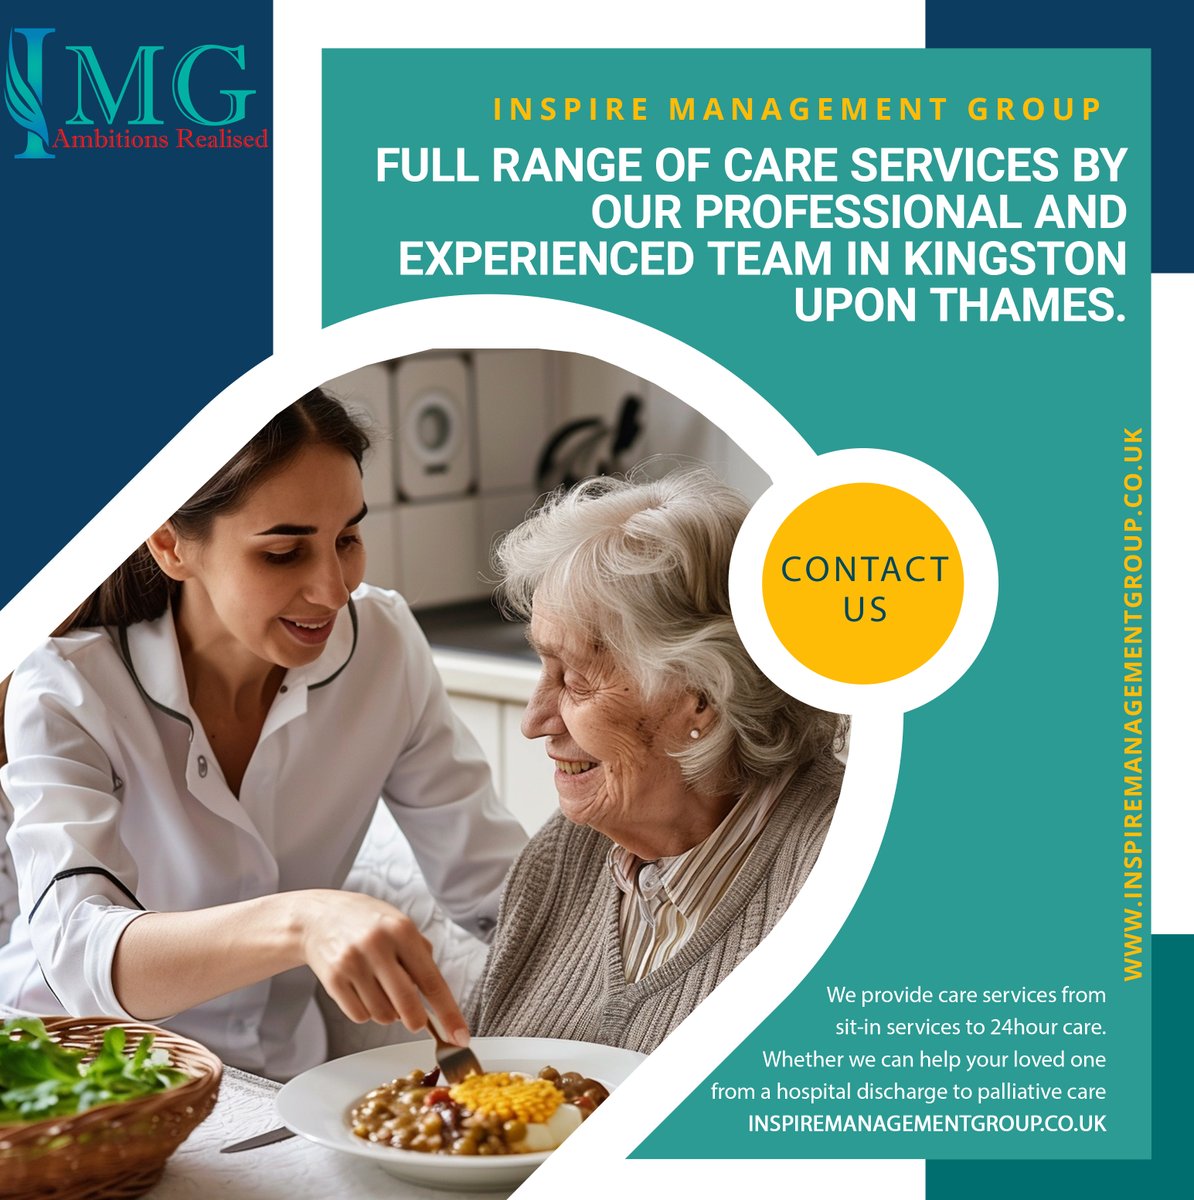 Full range of care services by our friendly, dignified and caring team in and around Kingston Upon Thames inspiremanagementgroup.co.uk #care #carer #careservices #homecare #kingstonuponthames